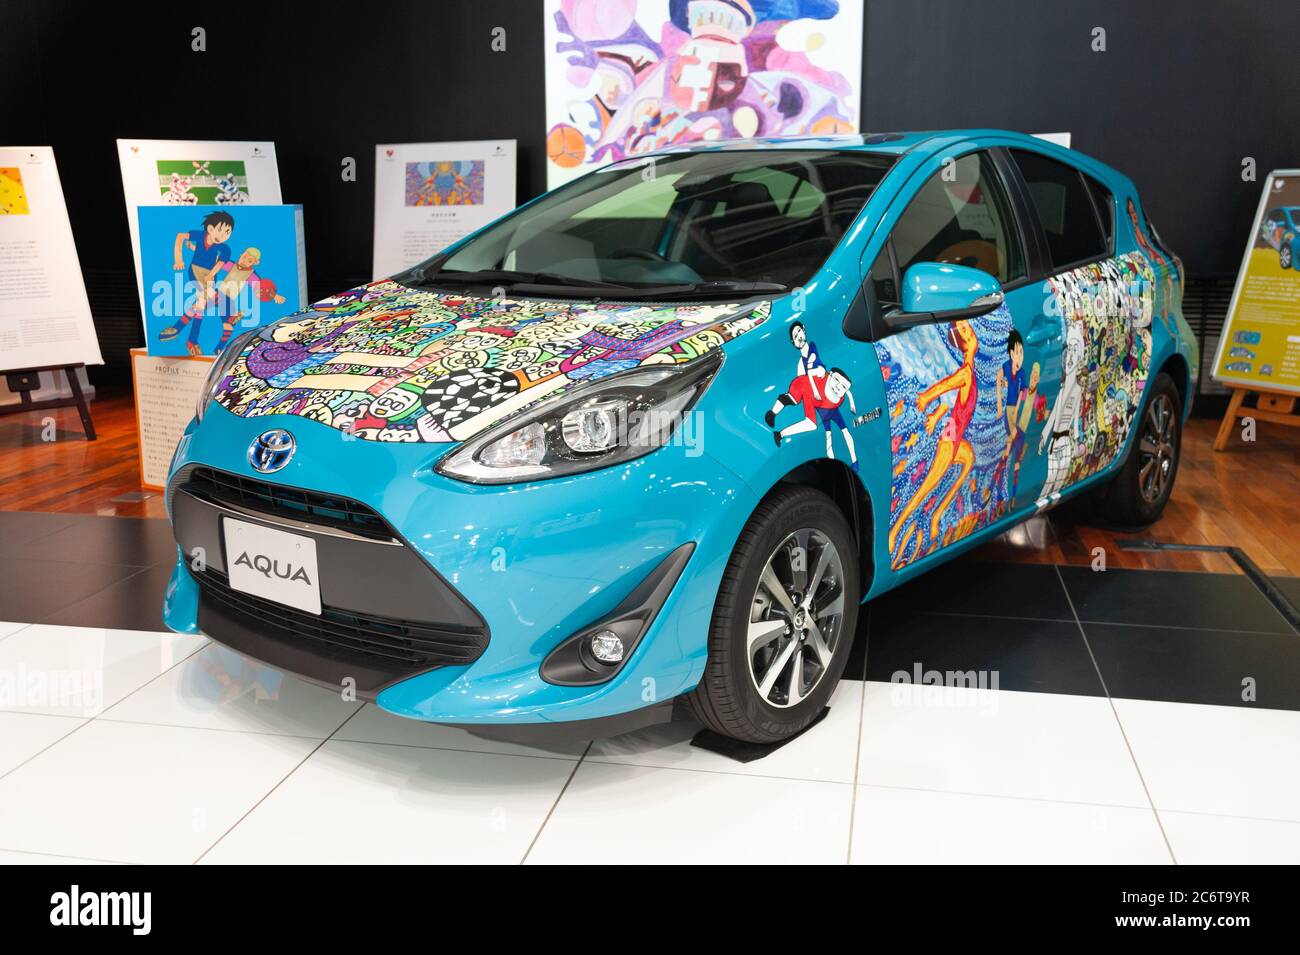 Odaiba, Tokyo, Japan - January 2, 2020: Toyota Prius c, named the Toyota Aqua in Japan, is a full hybrid gasoline-electric subcompact. Stock Photo